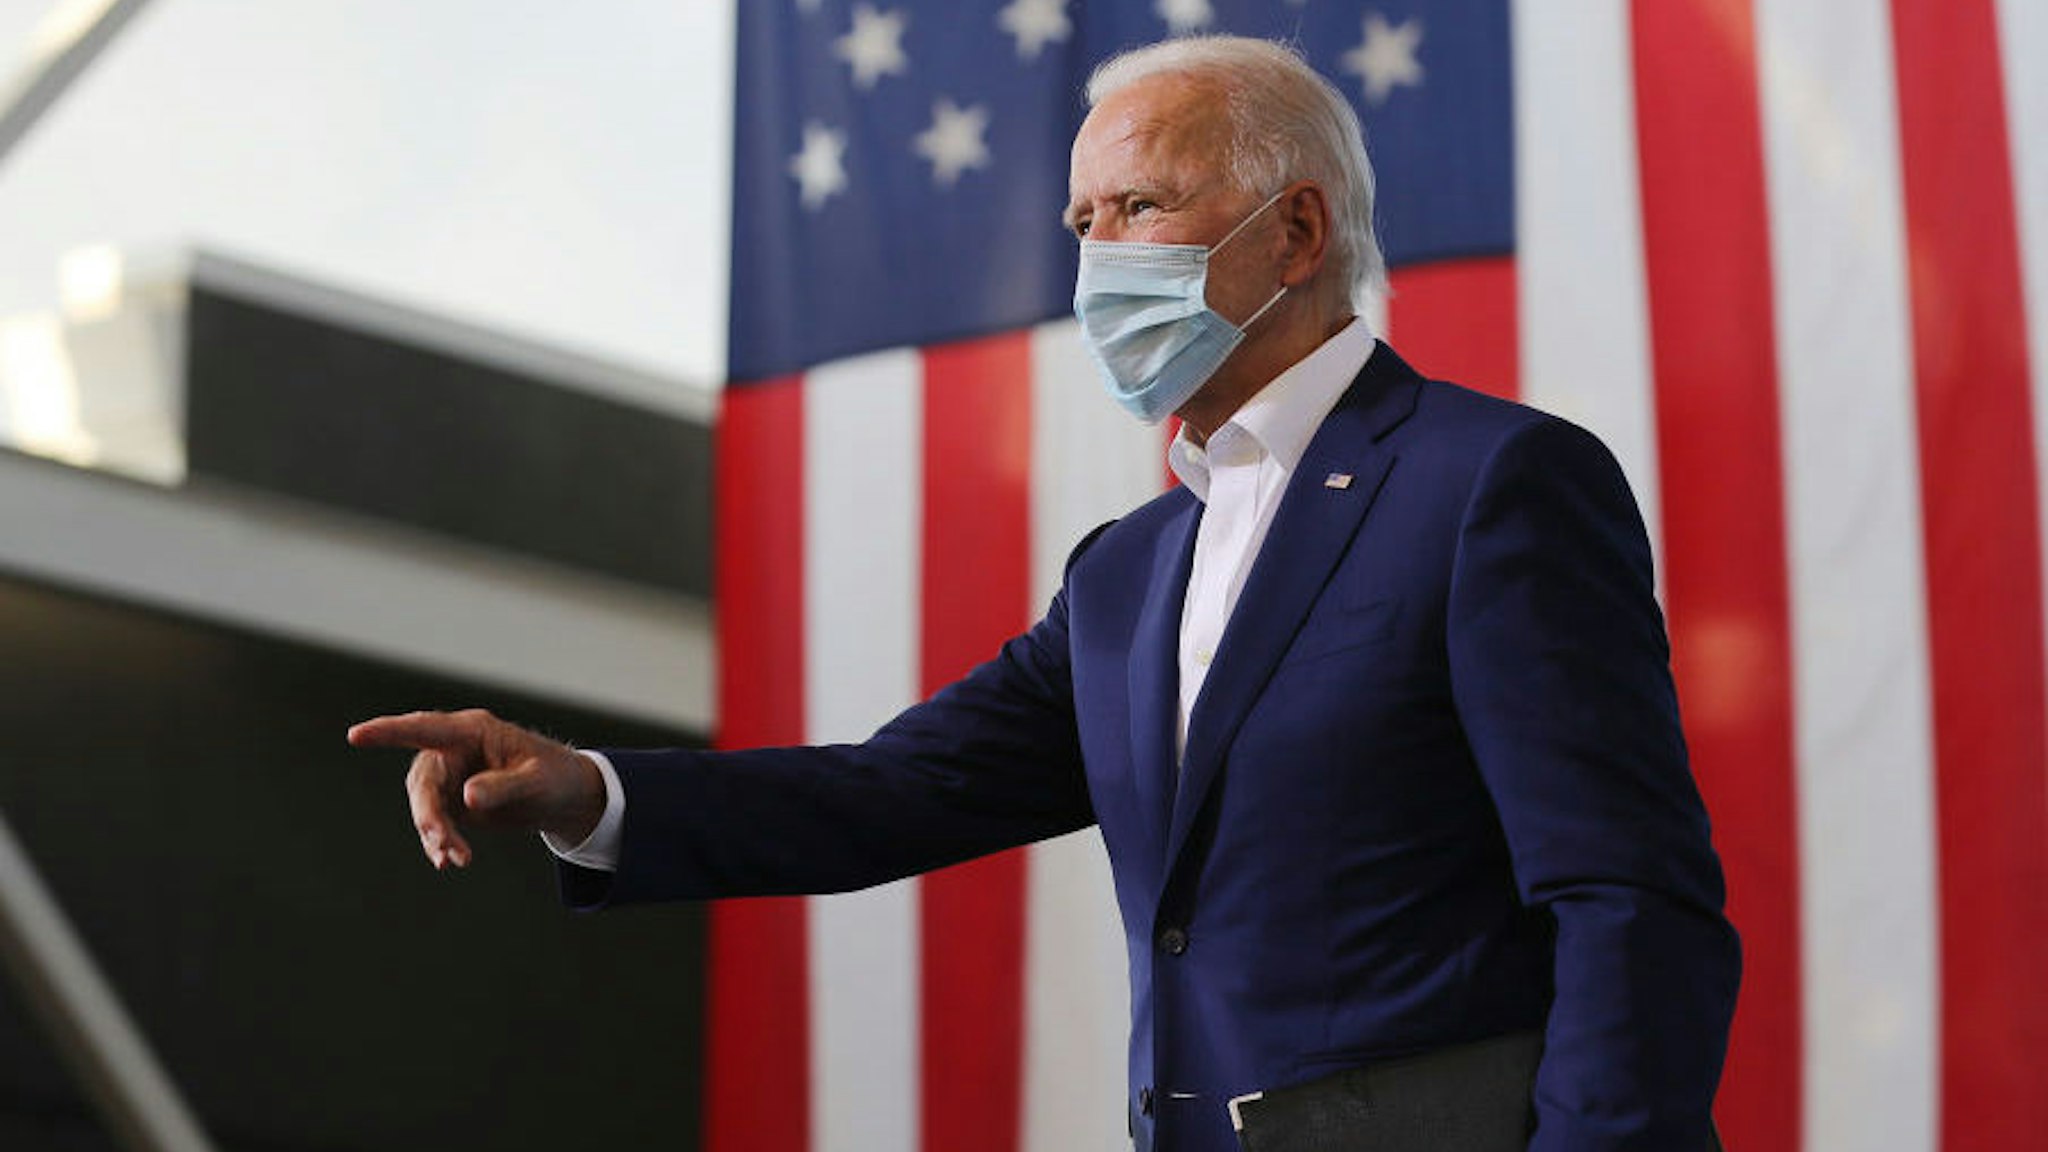 Wearing a face mask to reduce the risk posed by the coronavirus, Democratic presidential nominee Joe Biden points to supporters during a drive-in voter mobilization event at Miramar Regional Park October 13, 2020 in Miramar, Florida. With three weeks until Election Day, Biden is campaigning in Florida. (Photo by Chip Somodevilla/Getty Images)